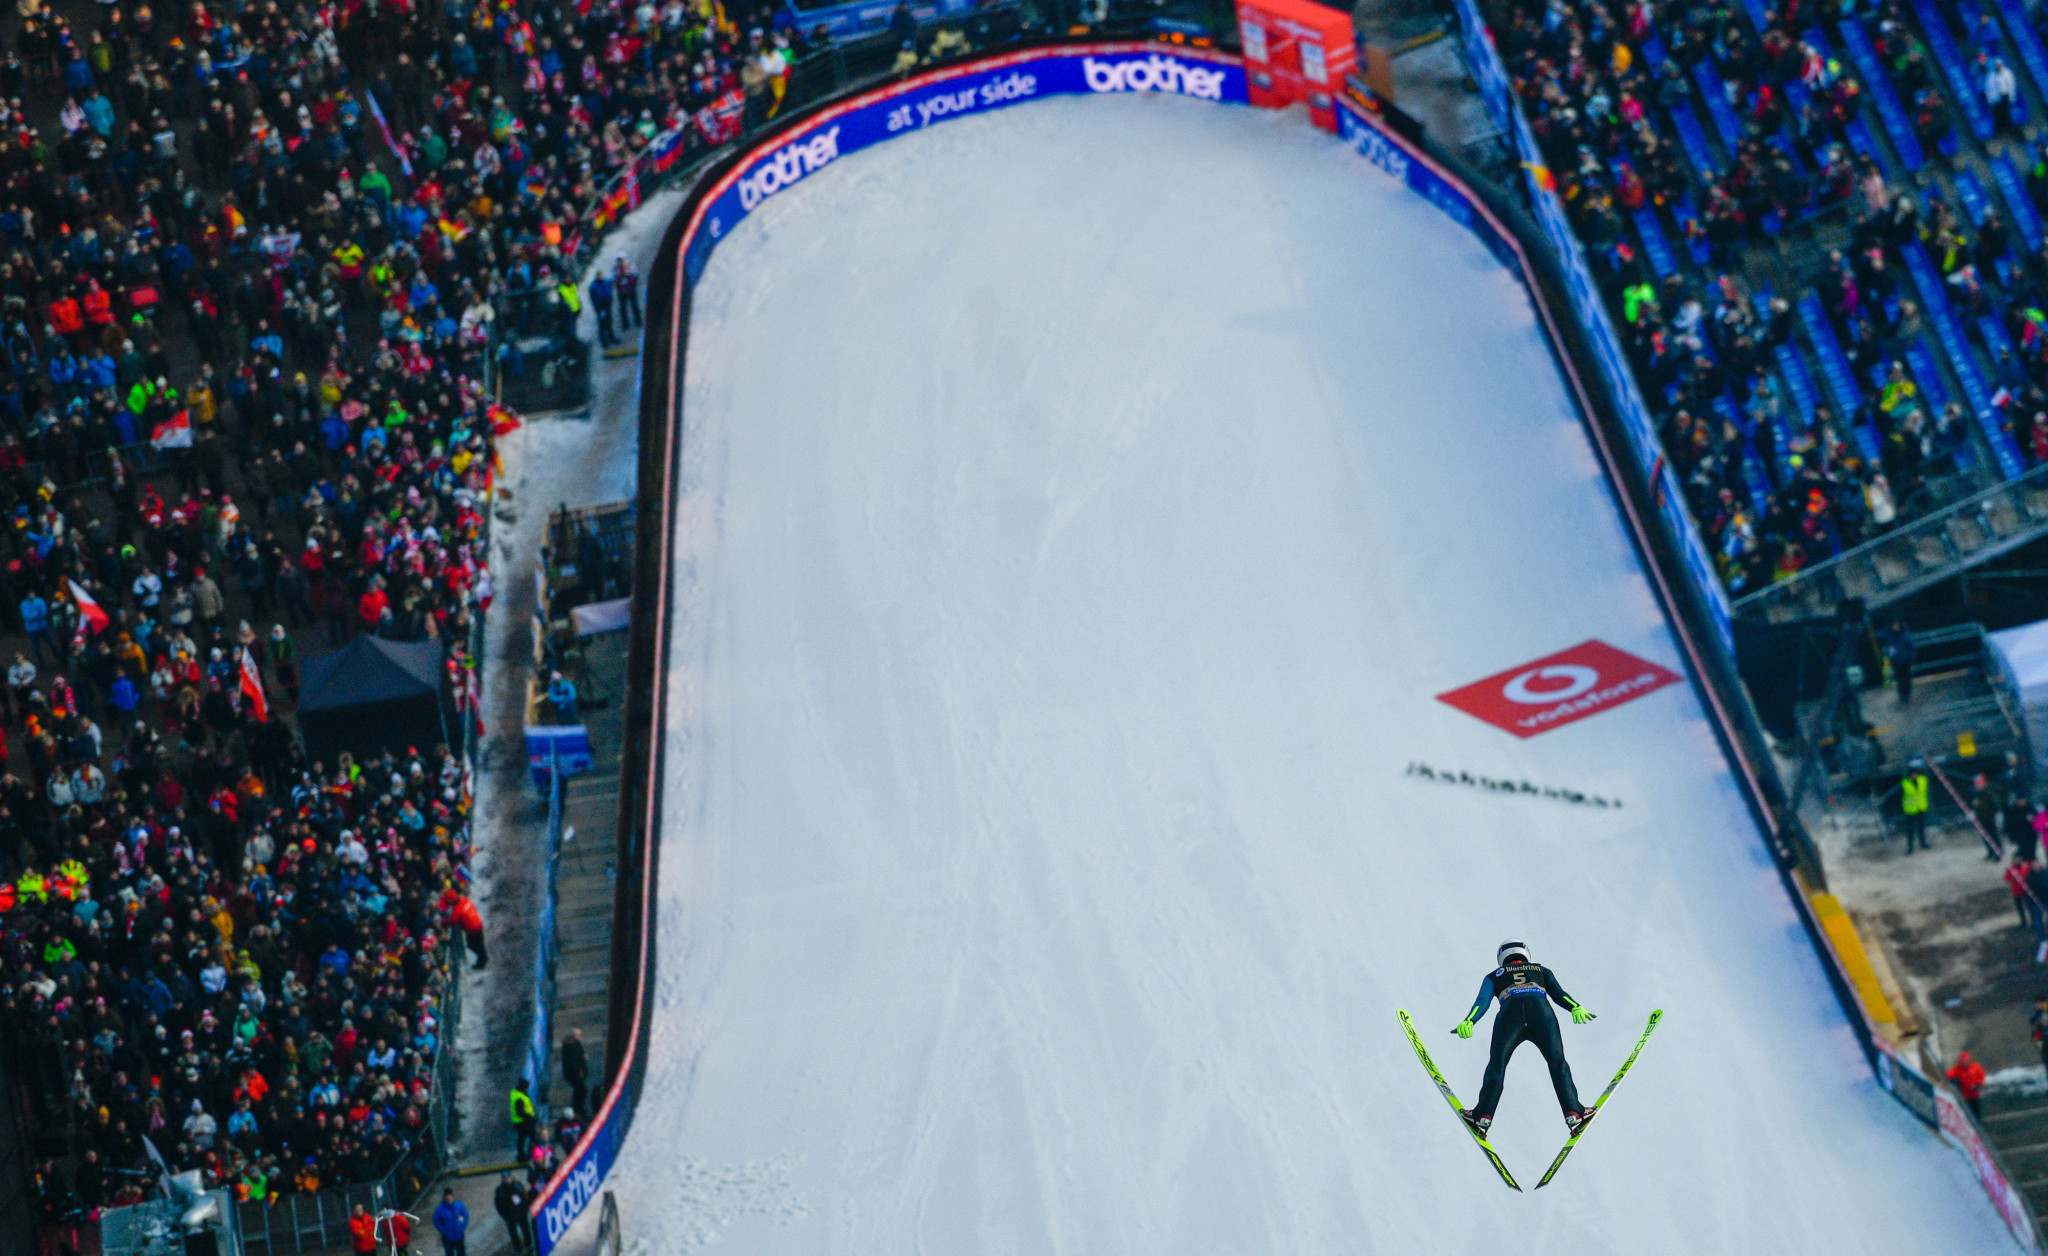 Strong winds delay FIS Ski Jumping World Cup in Willingen